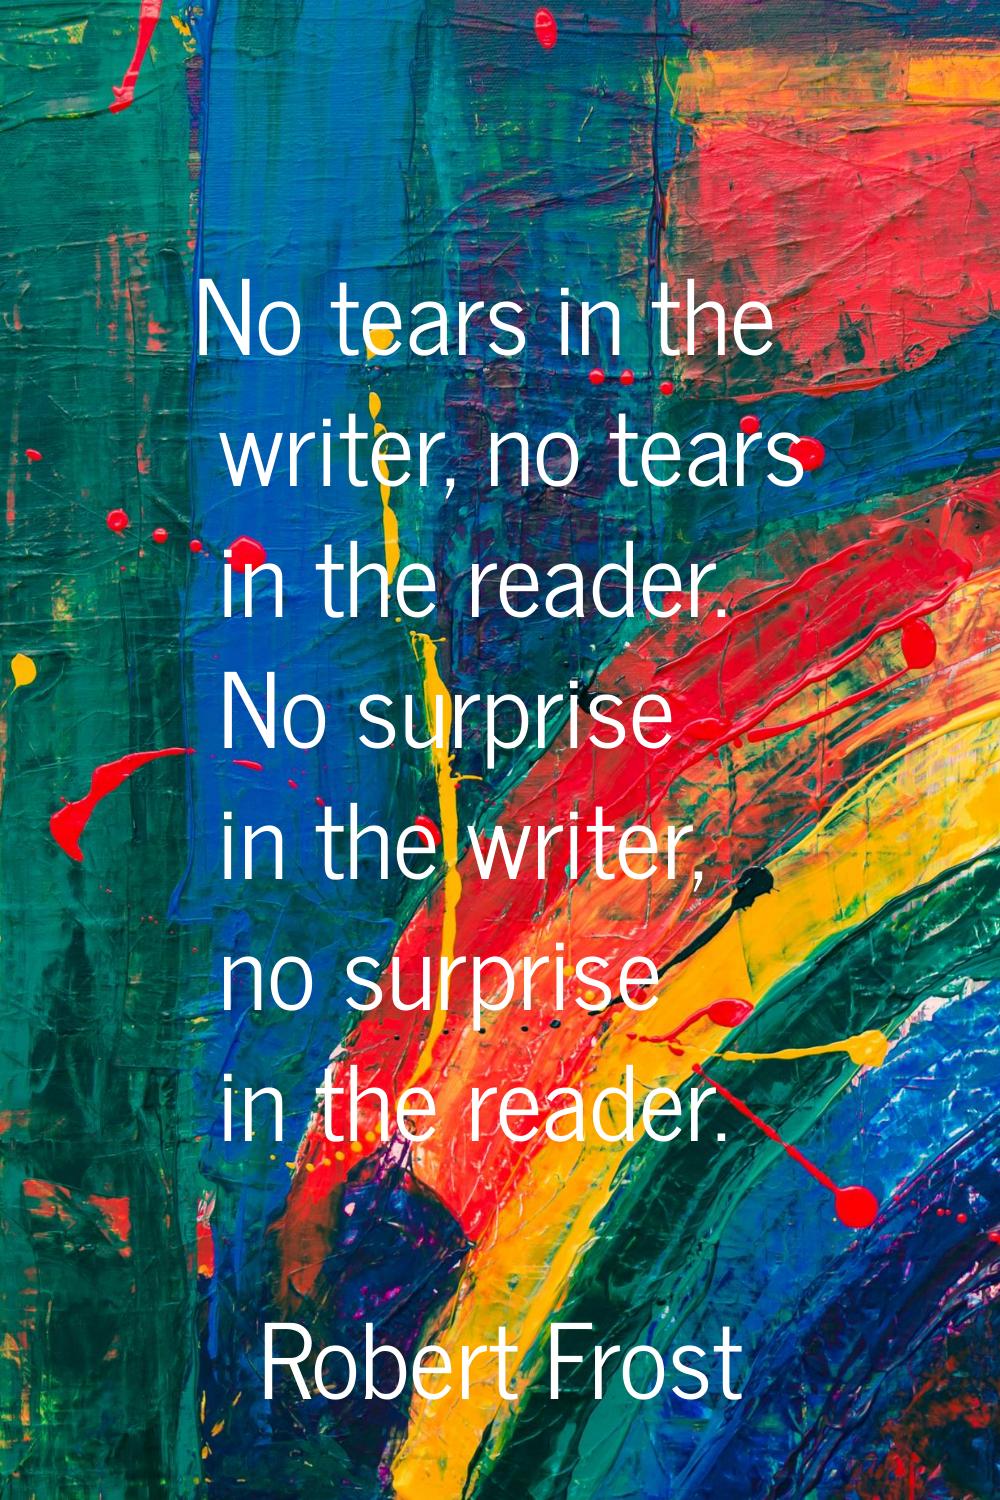 No tears in the writer, no tears in the reader. No surprise in the writer, no surprise in the reade